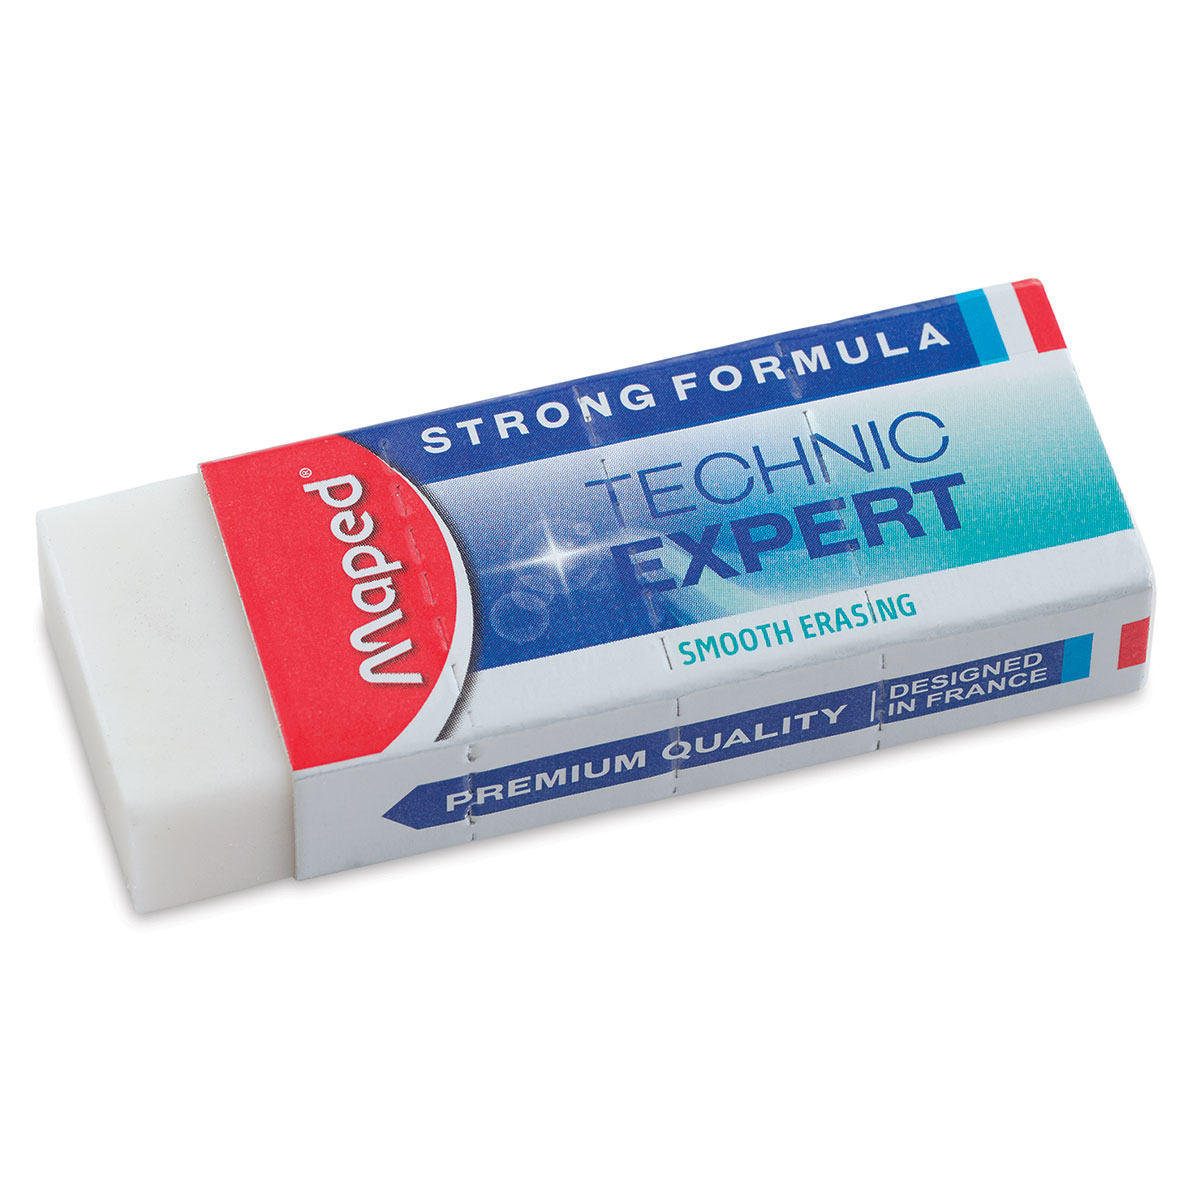 Maped Technic Ultra Classic Sleeved Eraser